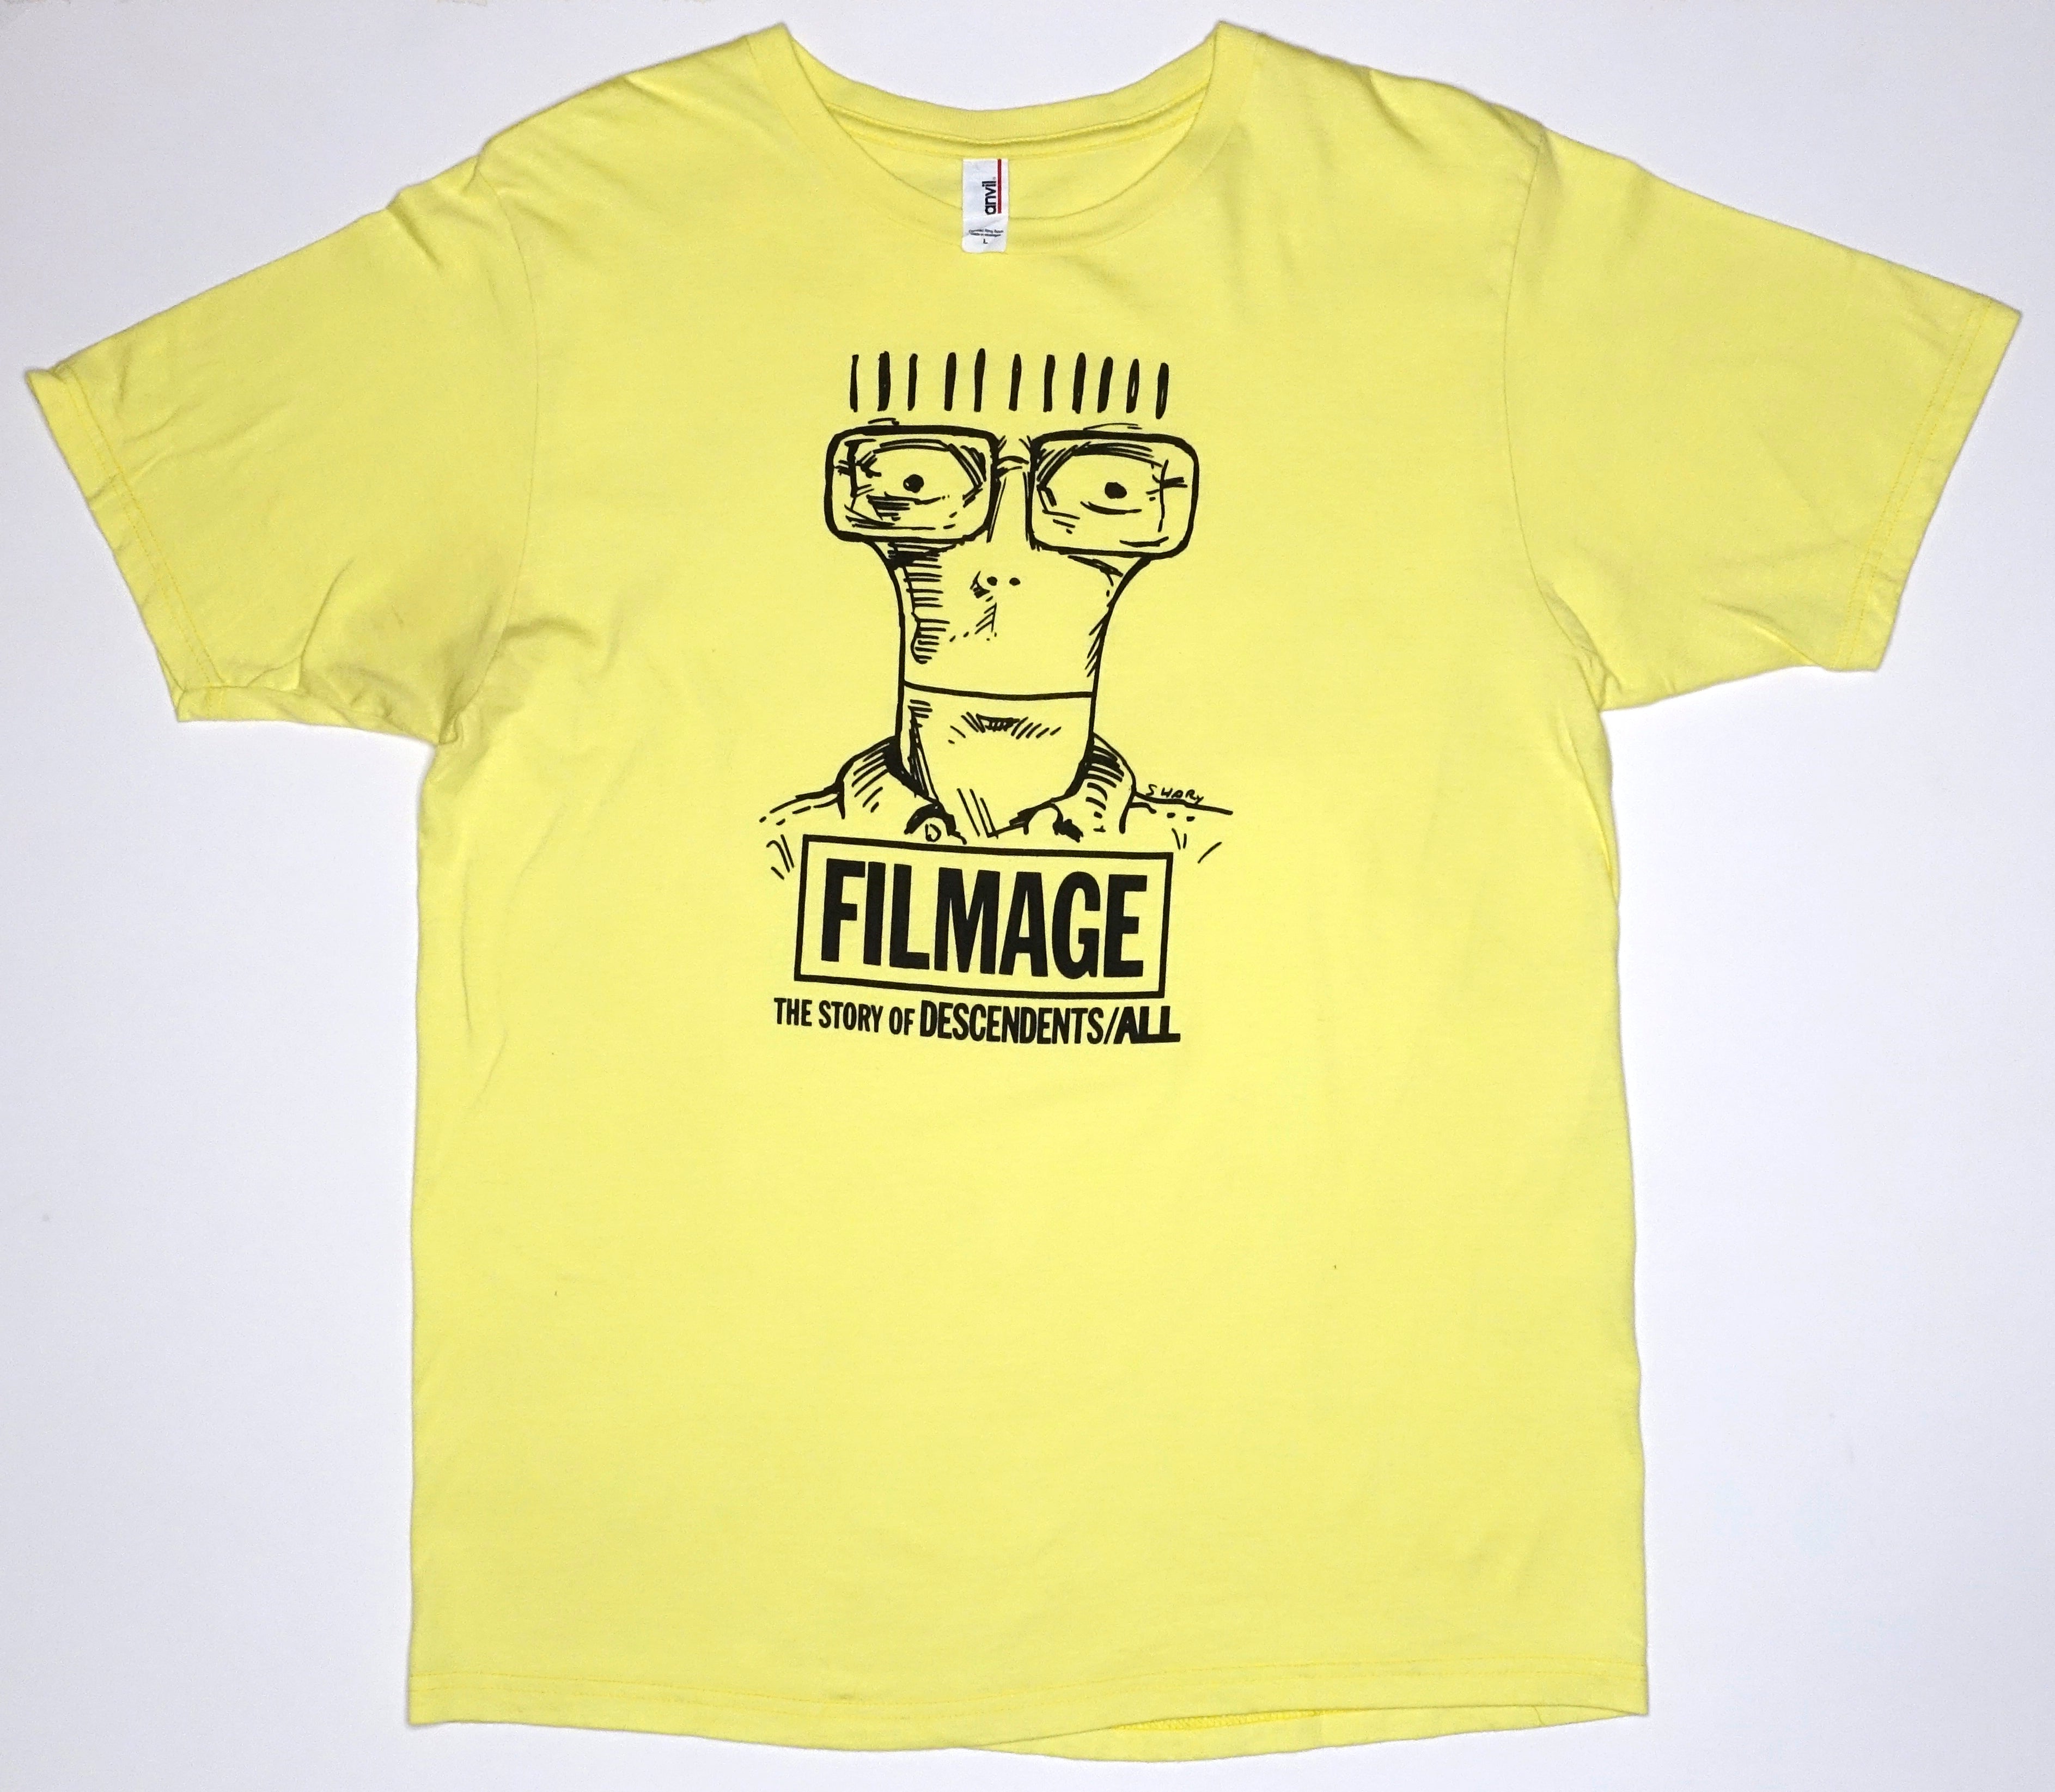 Descendents / ALL - Filmage Premiere Shirt Yellow Size Large